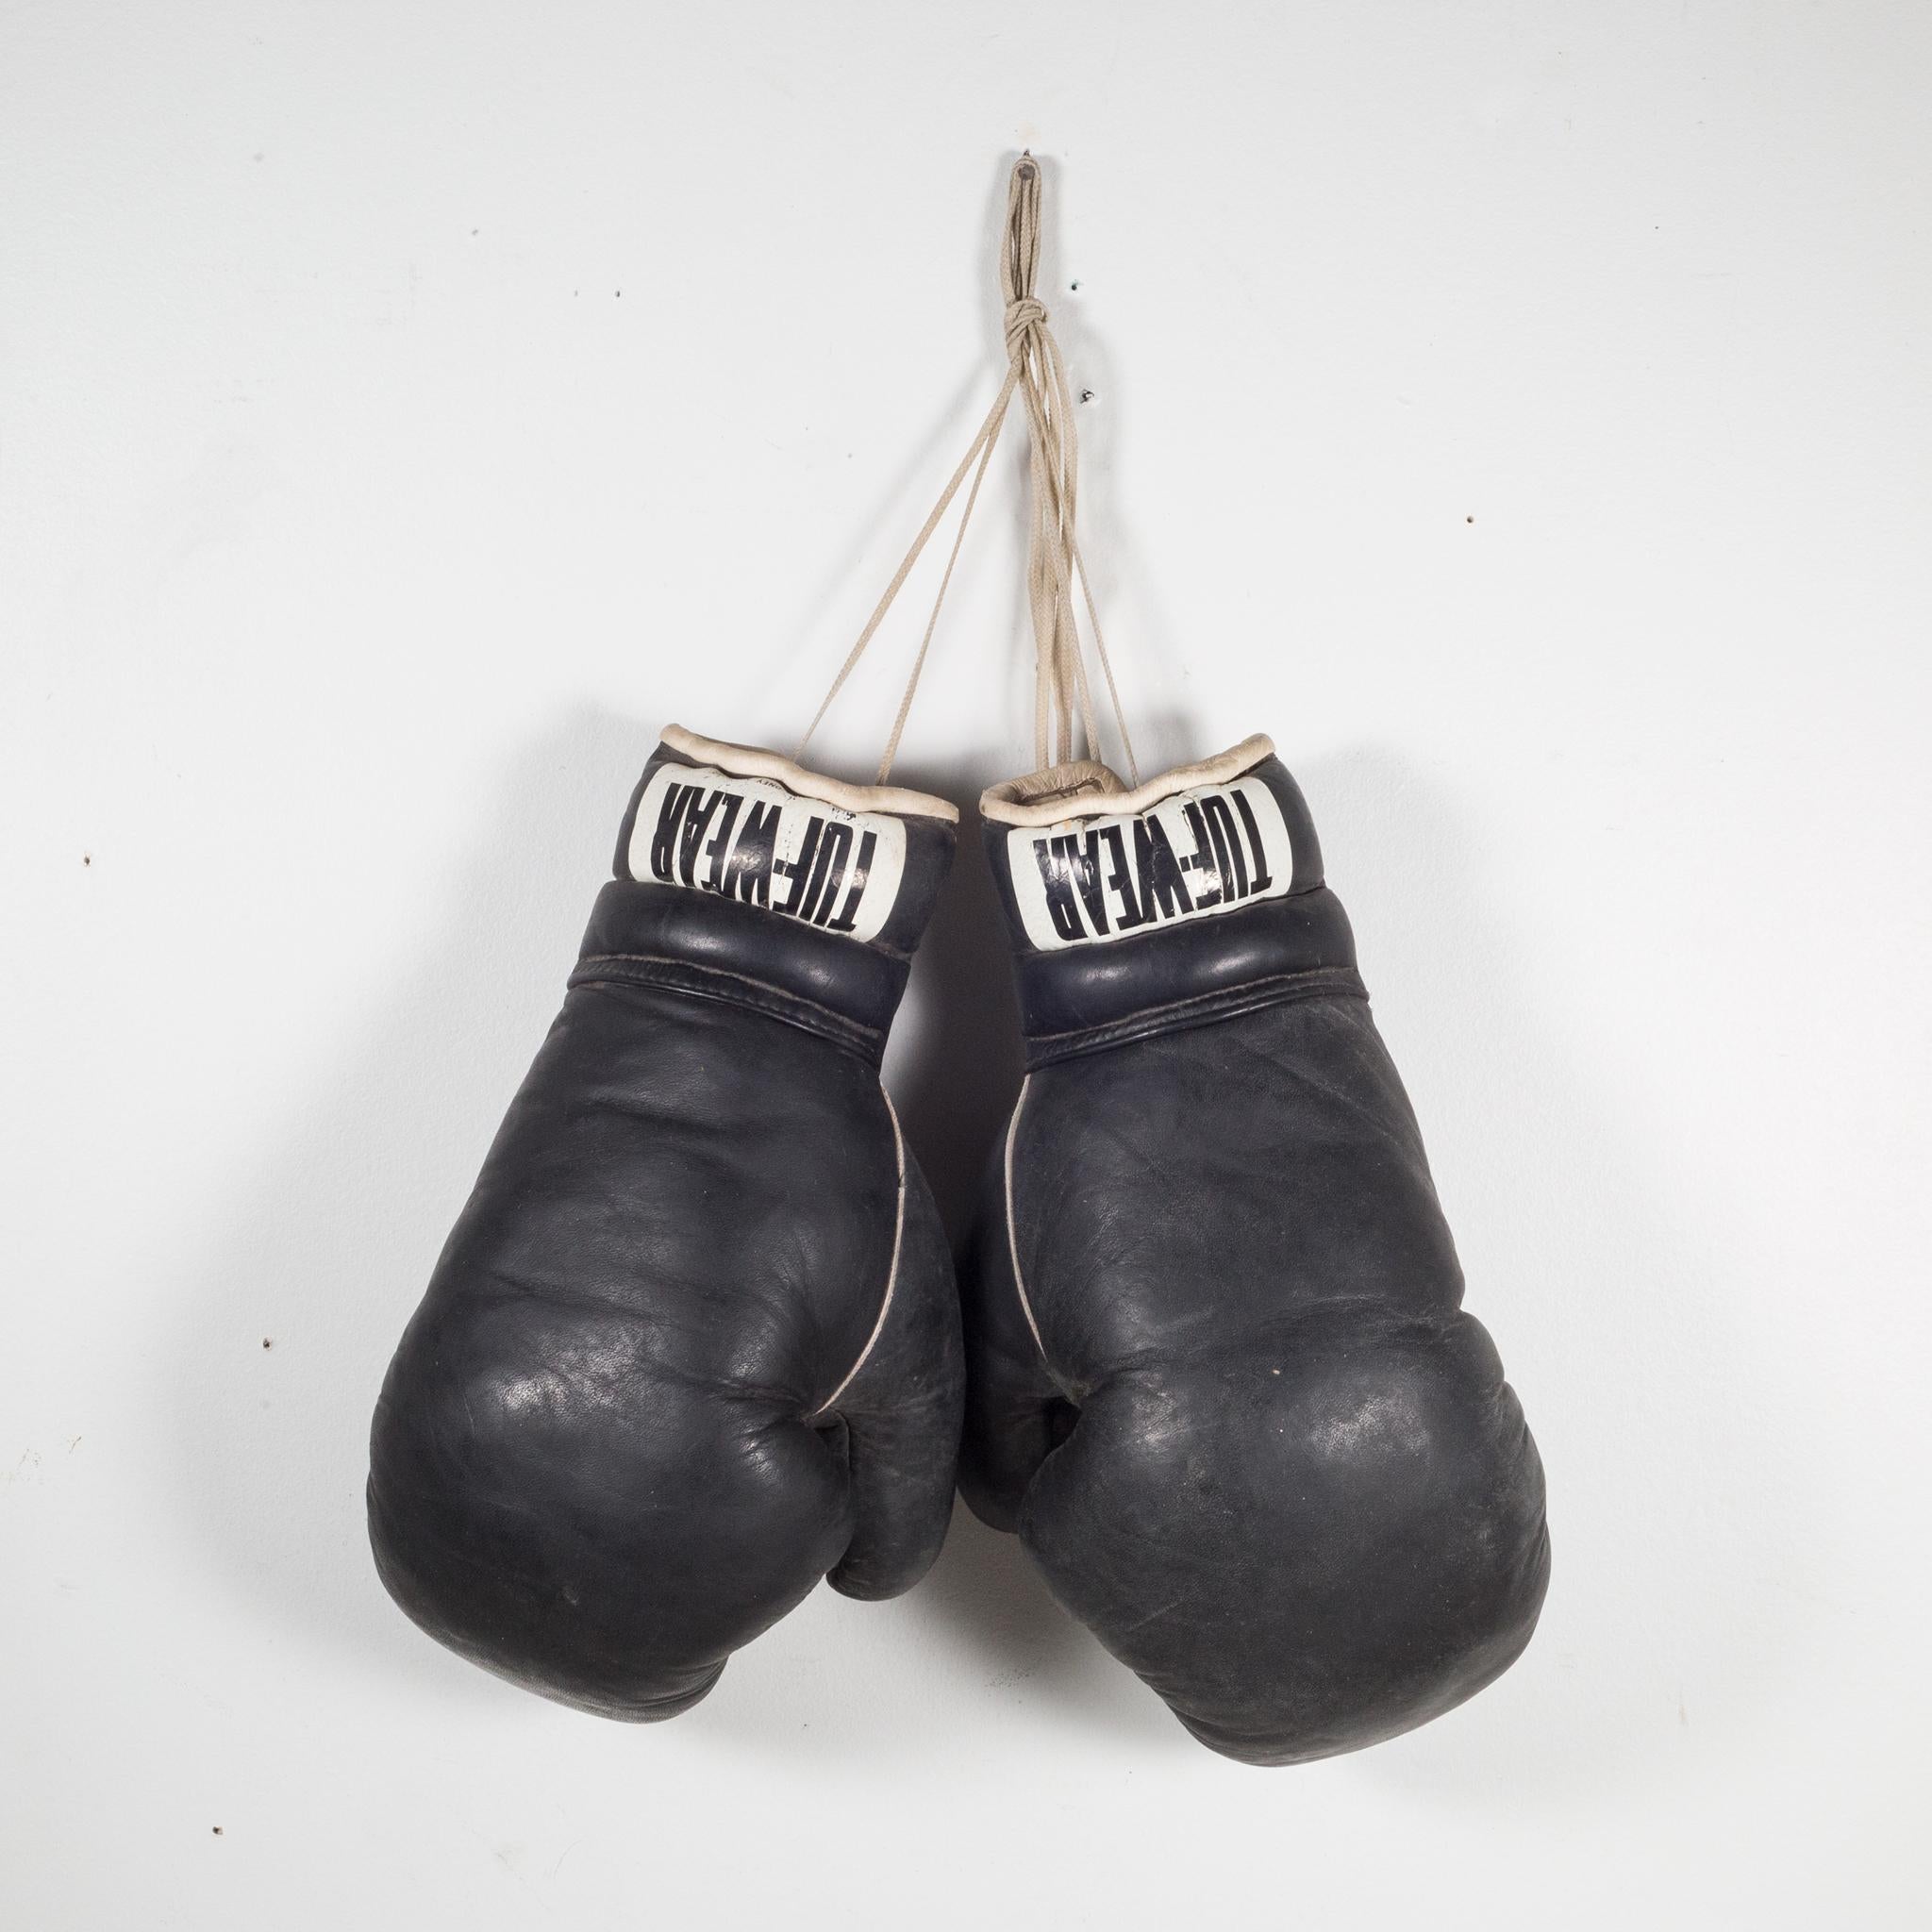 About

This is a original pair of Tuf wear leather boxing gloves. The boxing gloves are black leather with white piping, white laces and a leather 